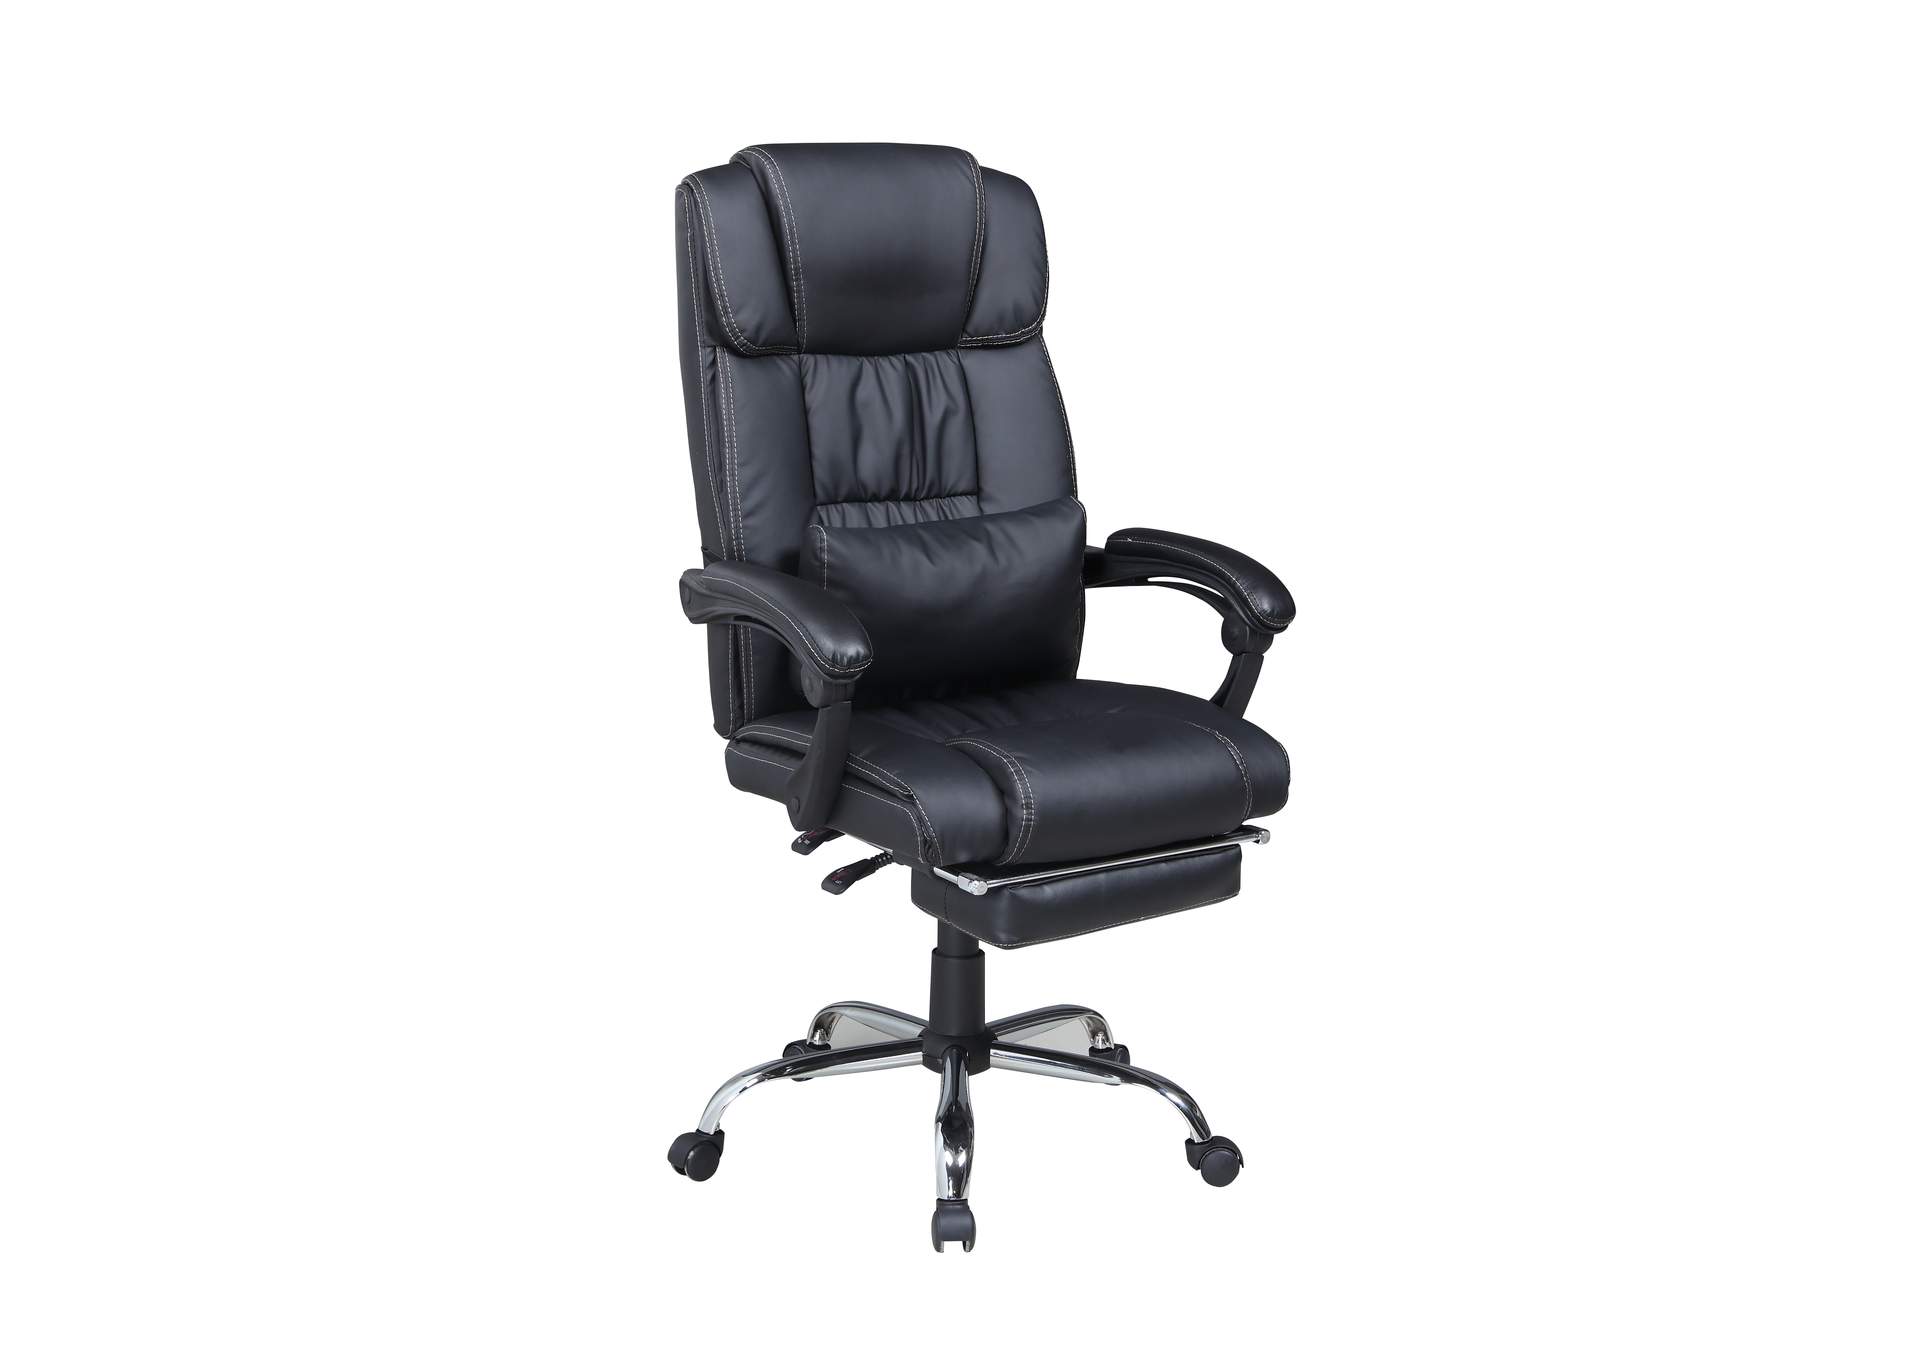 Modern Ergonomic Computer Chair With Extendable Footrest,Chintaly Imports